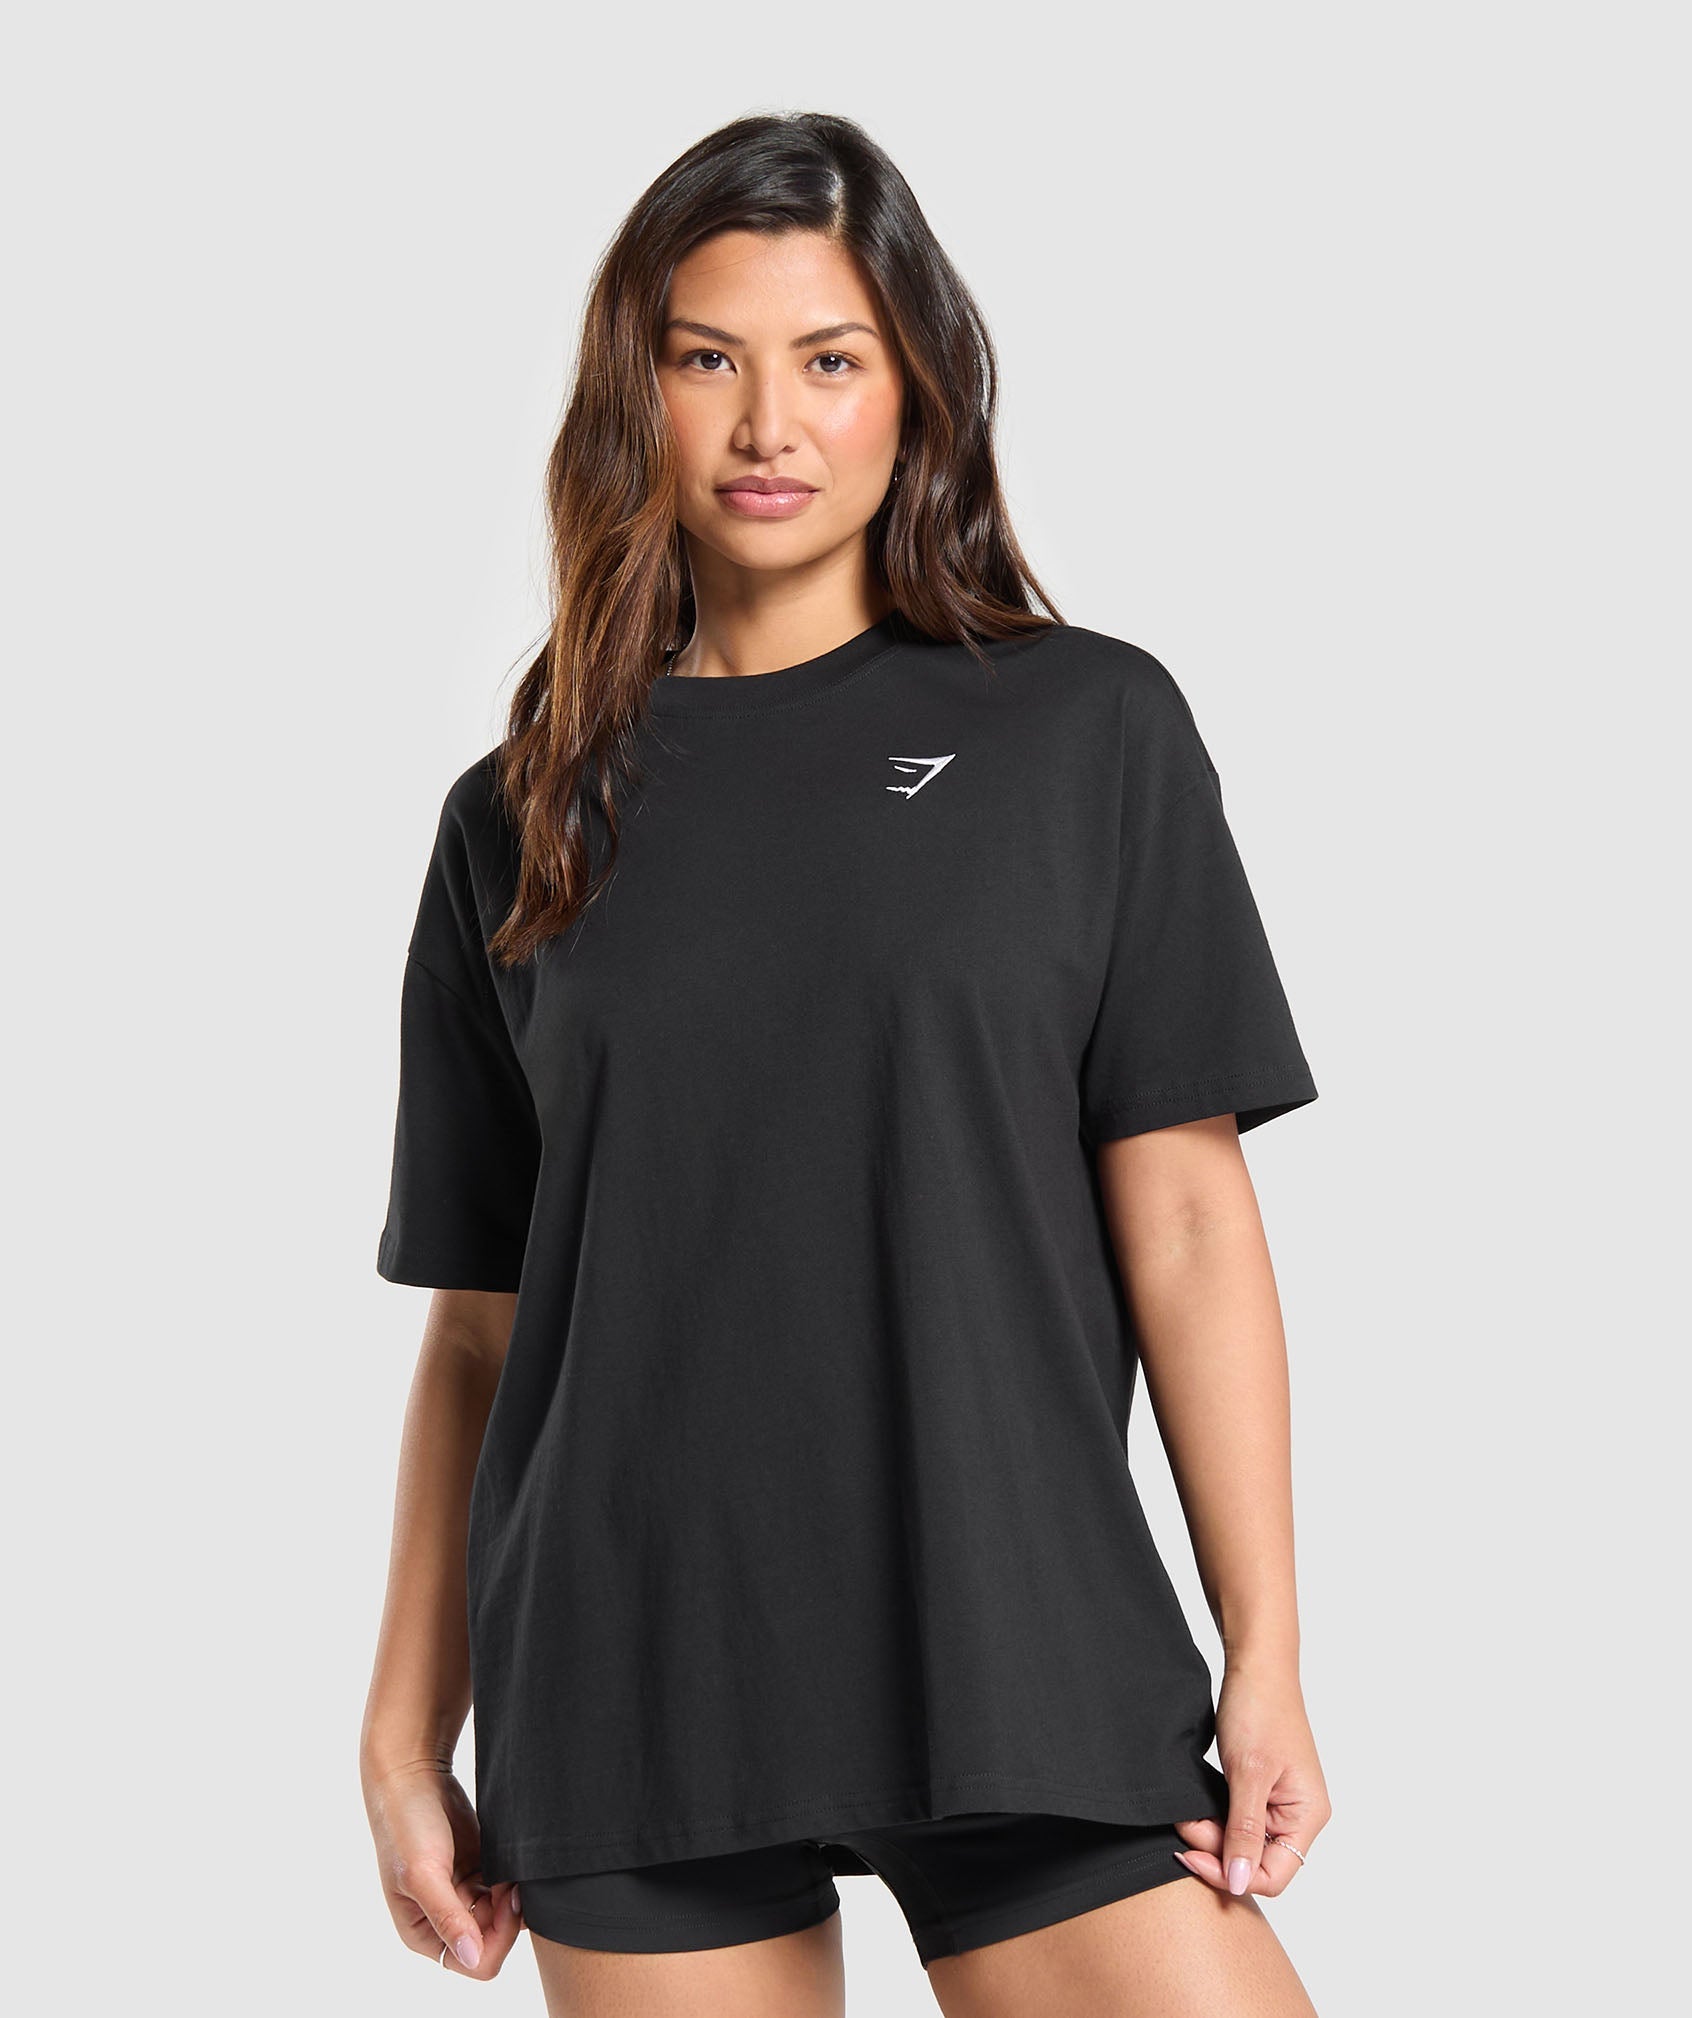 Training Oversized T-Shirt in Black - view 1